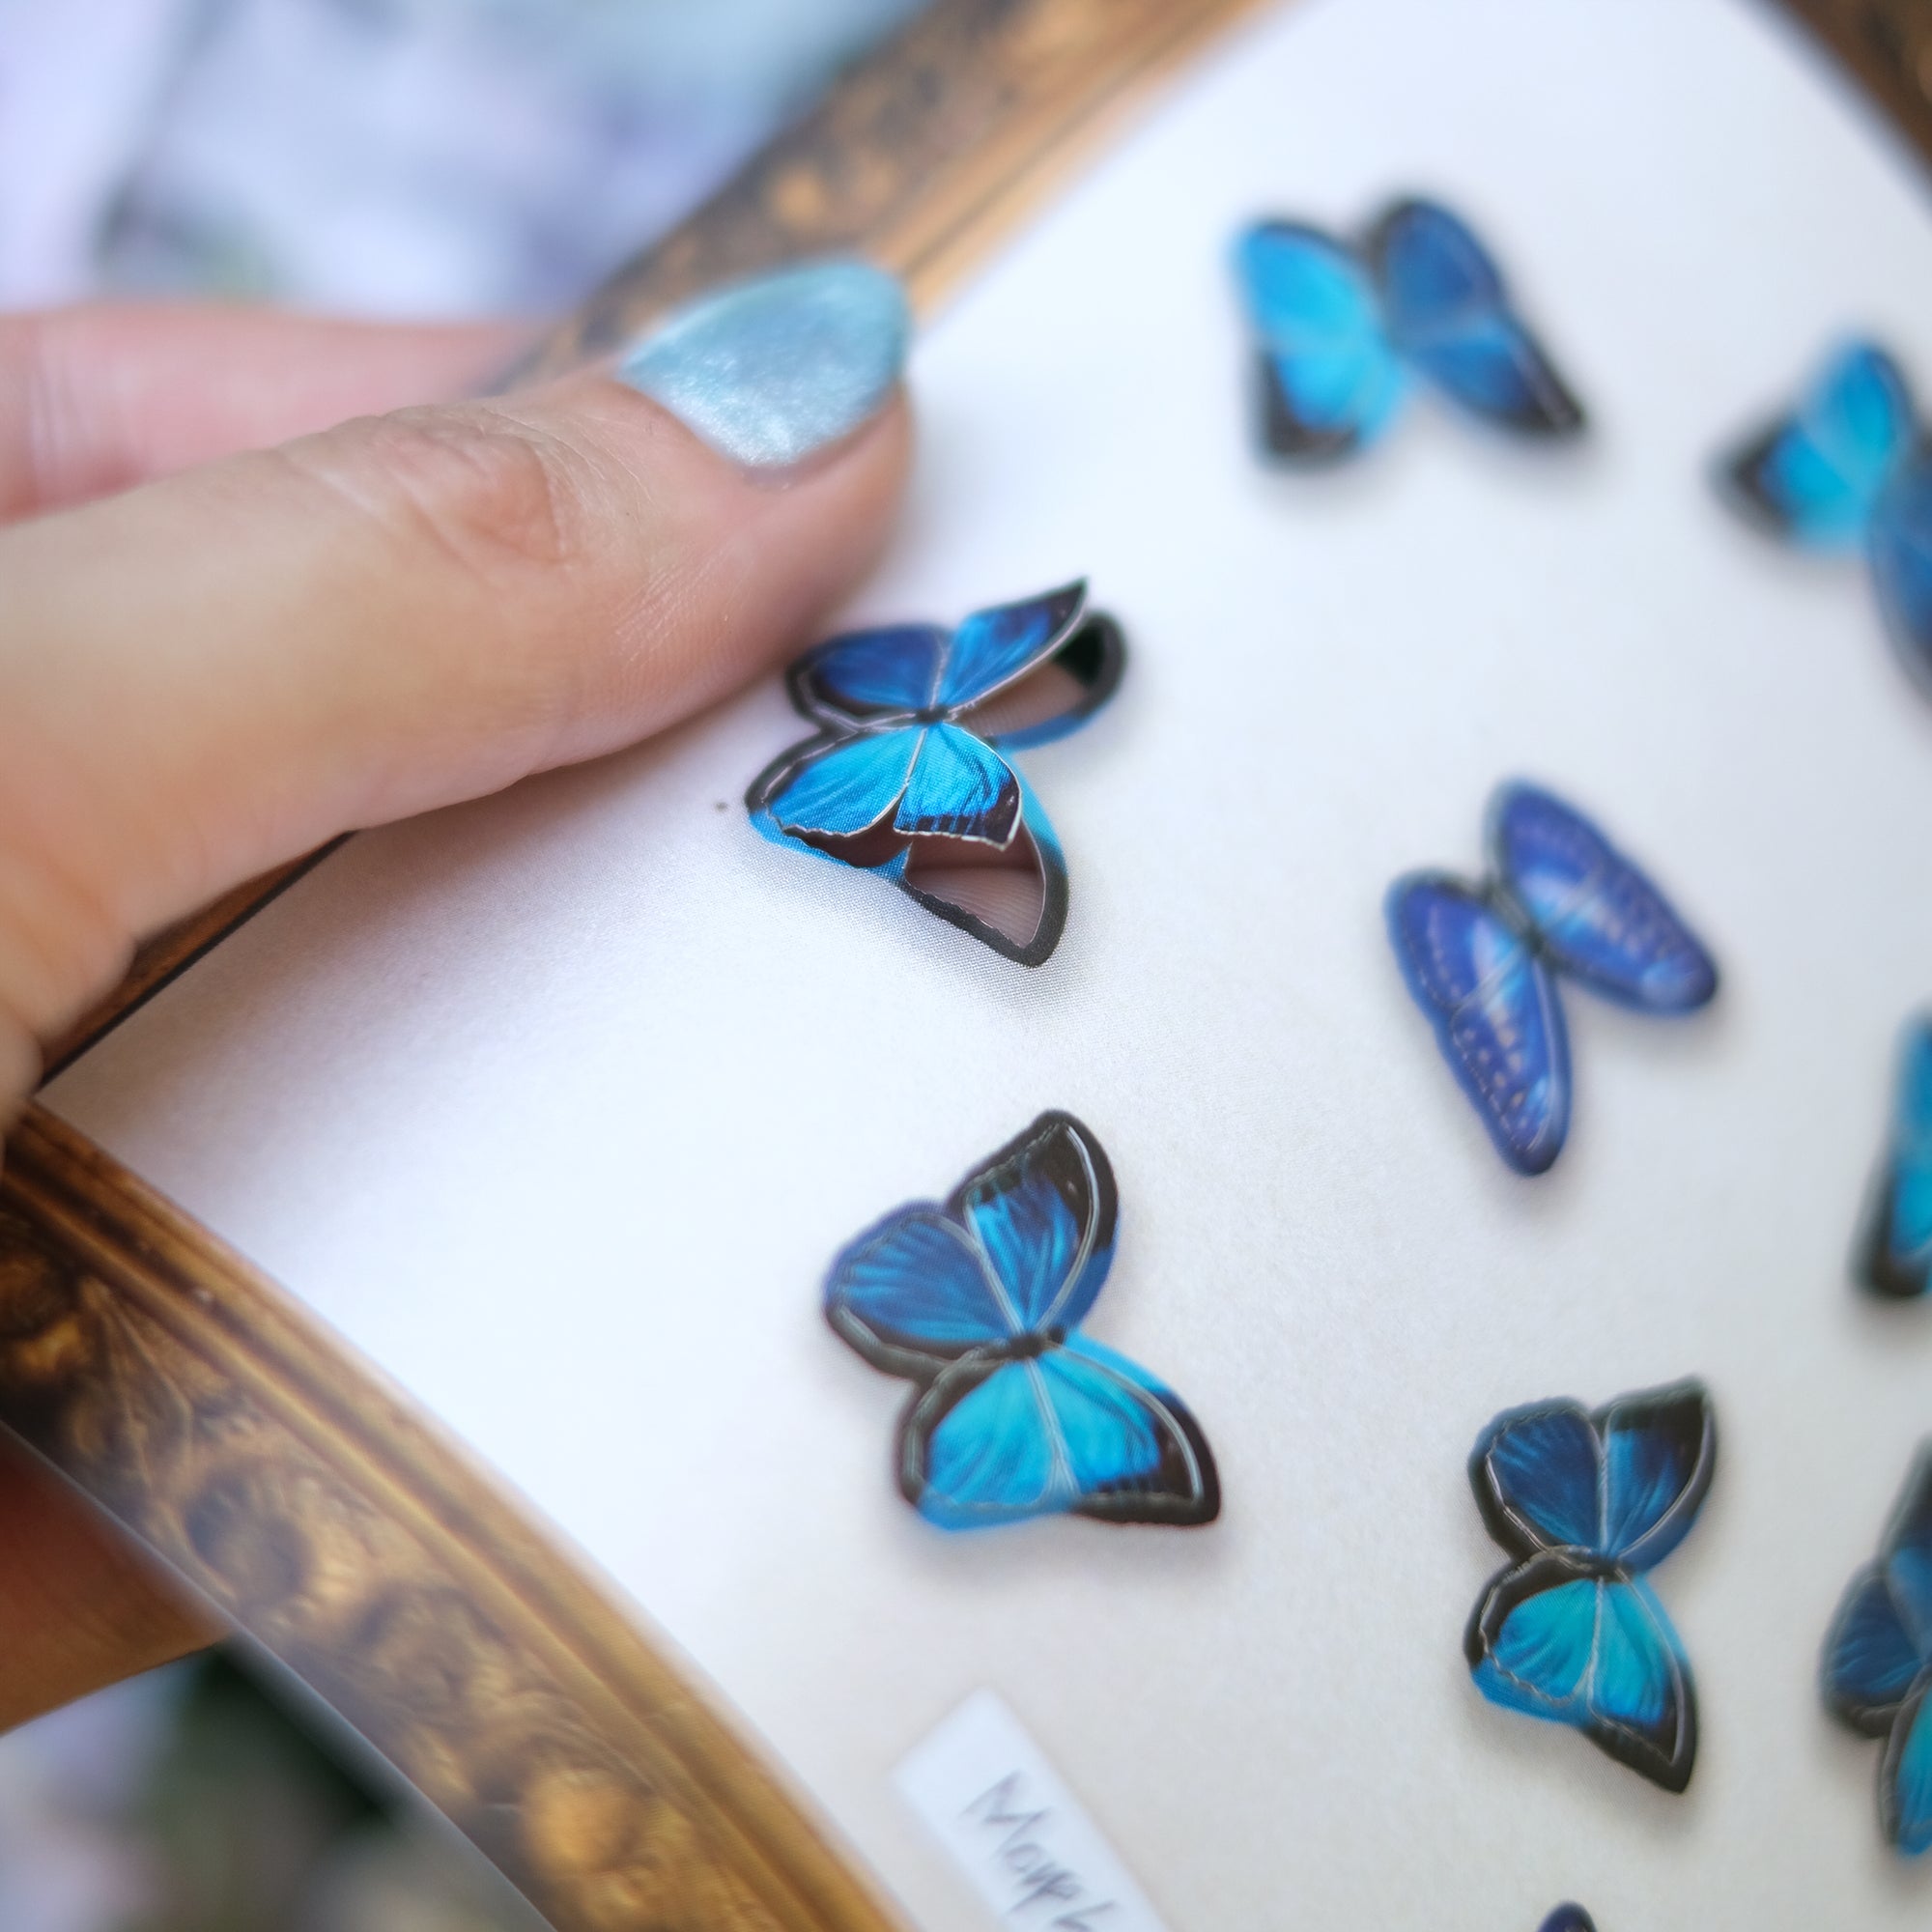 'Cerulean' Micro Morpho Butterfly Collection Artist Wholesale